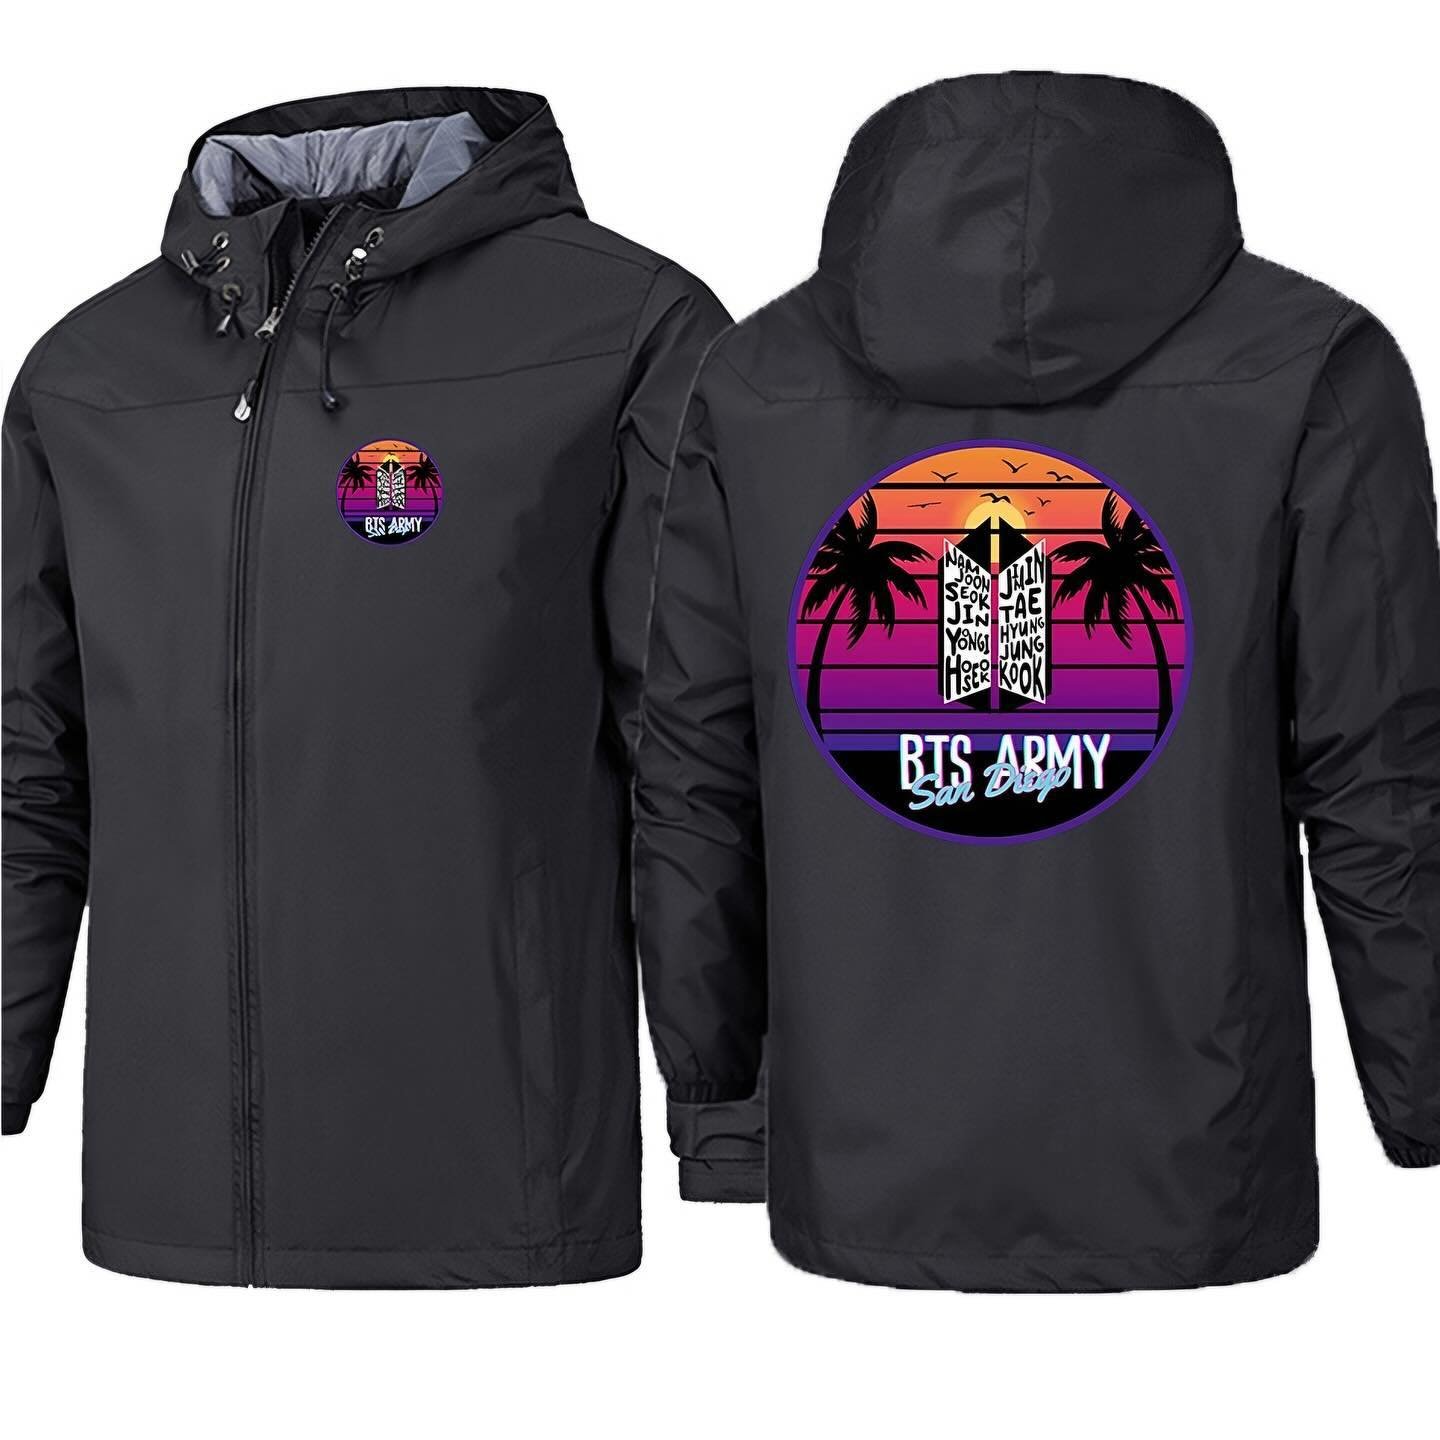 San Diego BTS ARMY Hooded Jackets! Made specifically for ARMY by ARMY with a different design on each color. Store link in bio! BTS logos with the fanchant laid over scenic SD lifestyle images. The combo will make you think we live in BU-SAN DIEGO! T